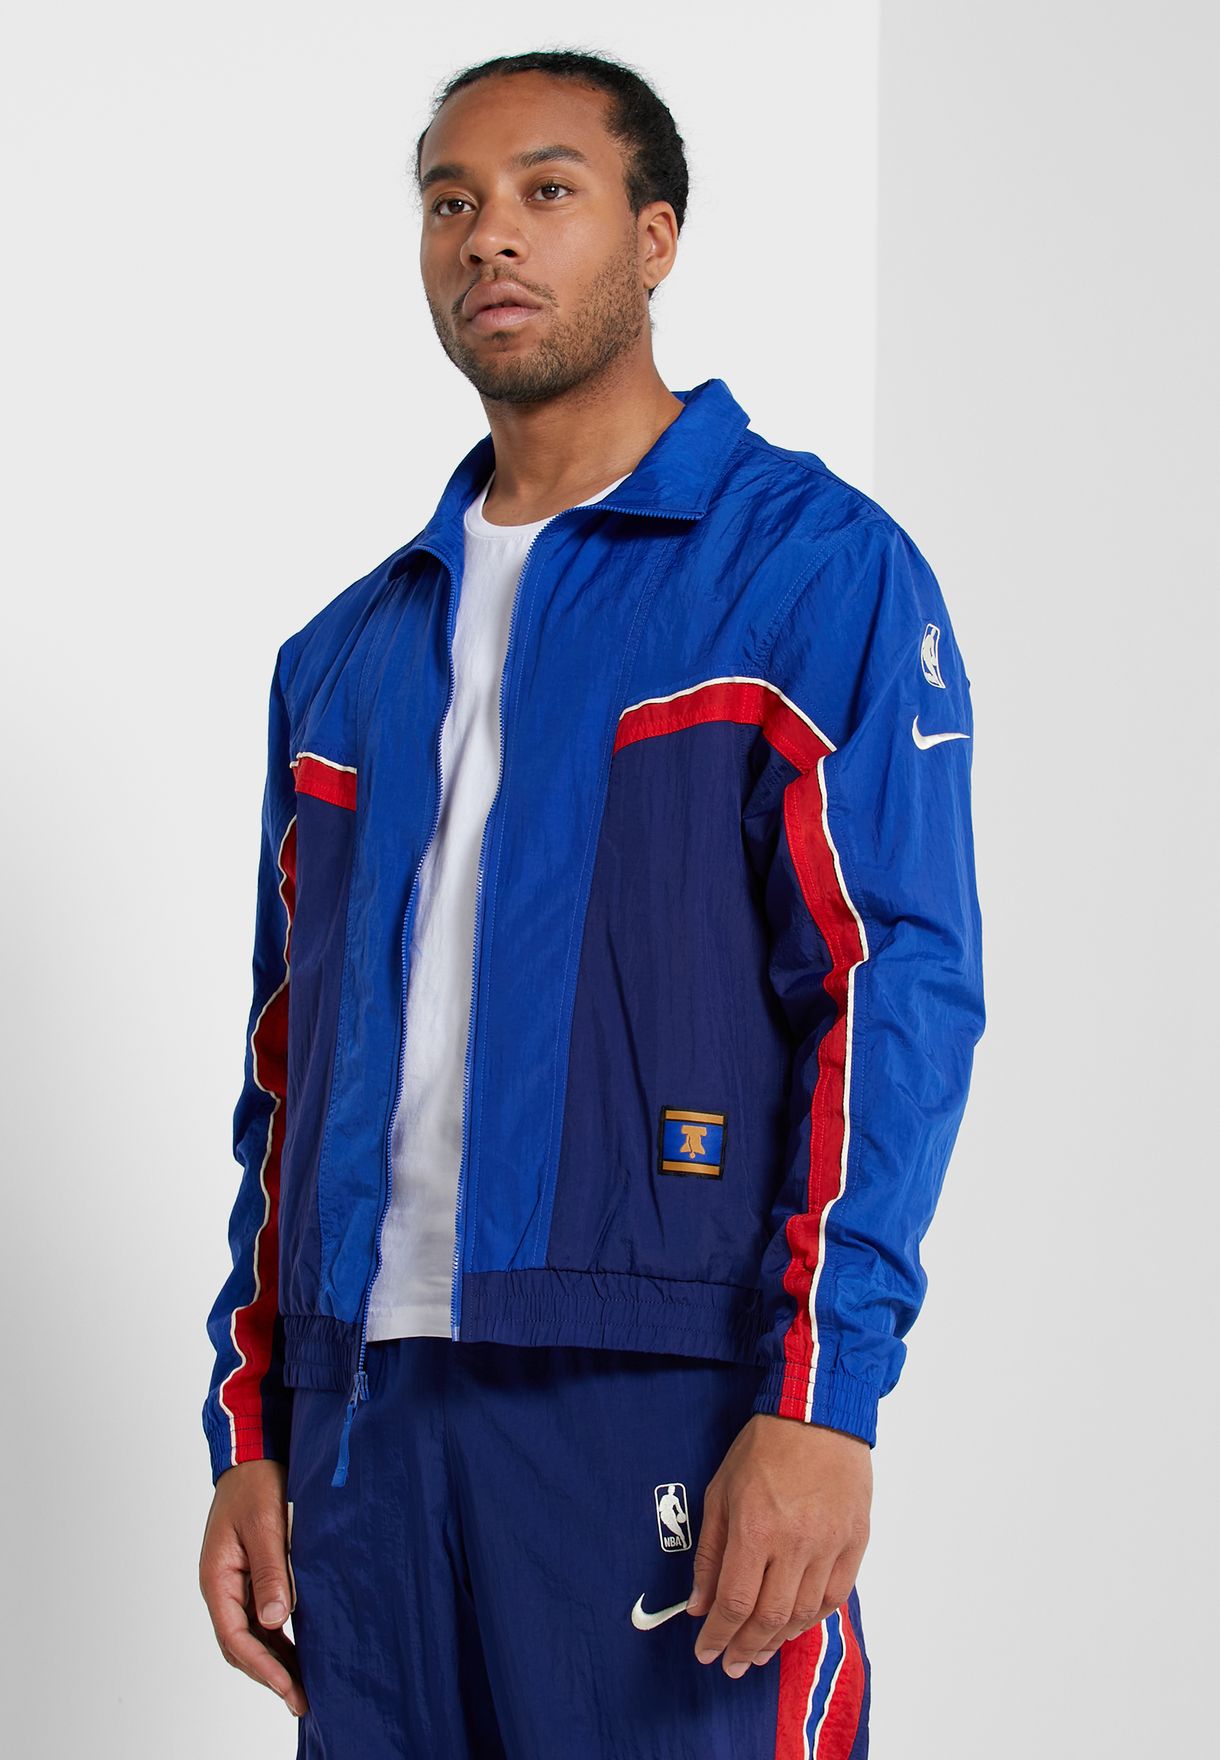 76ers tracksuit